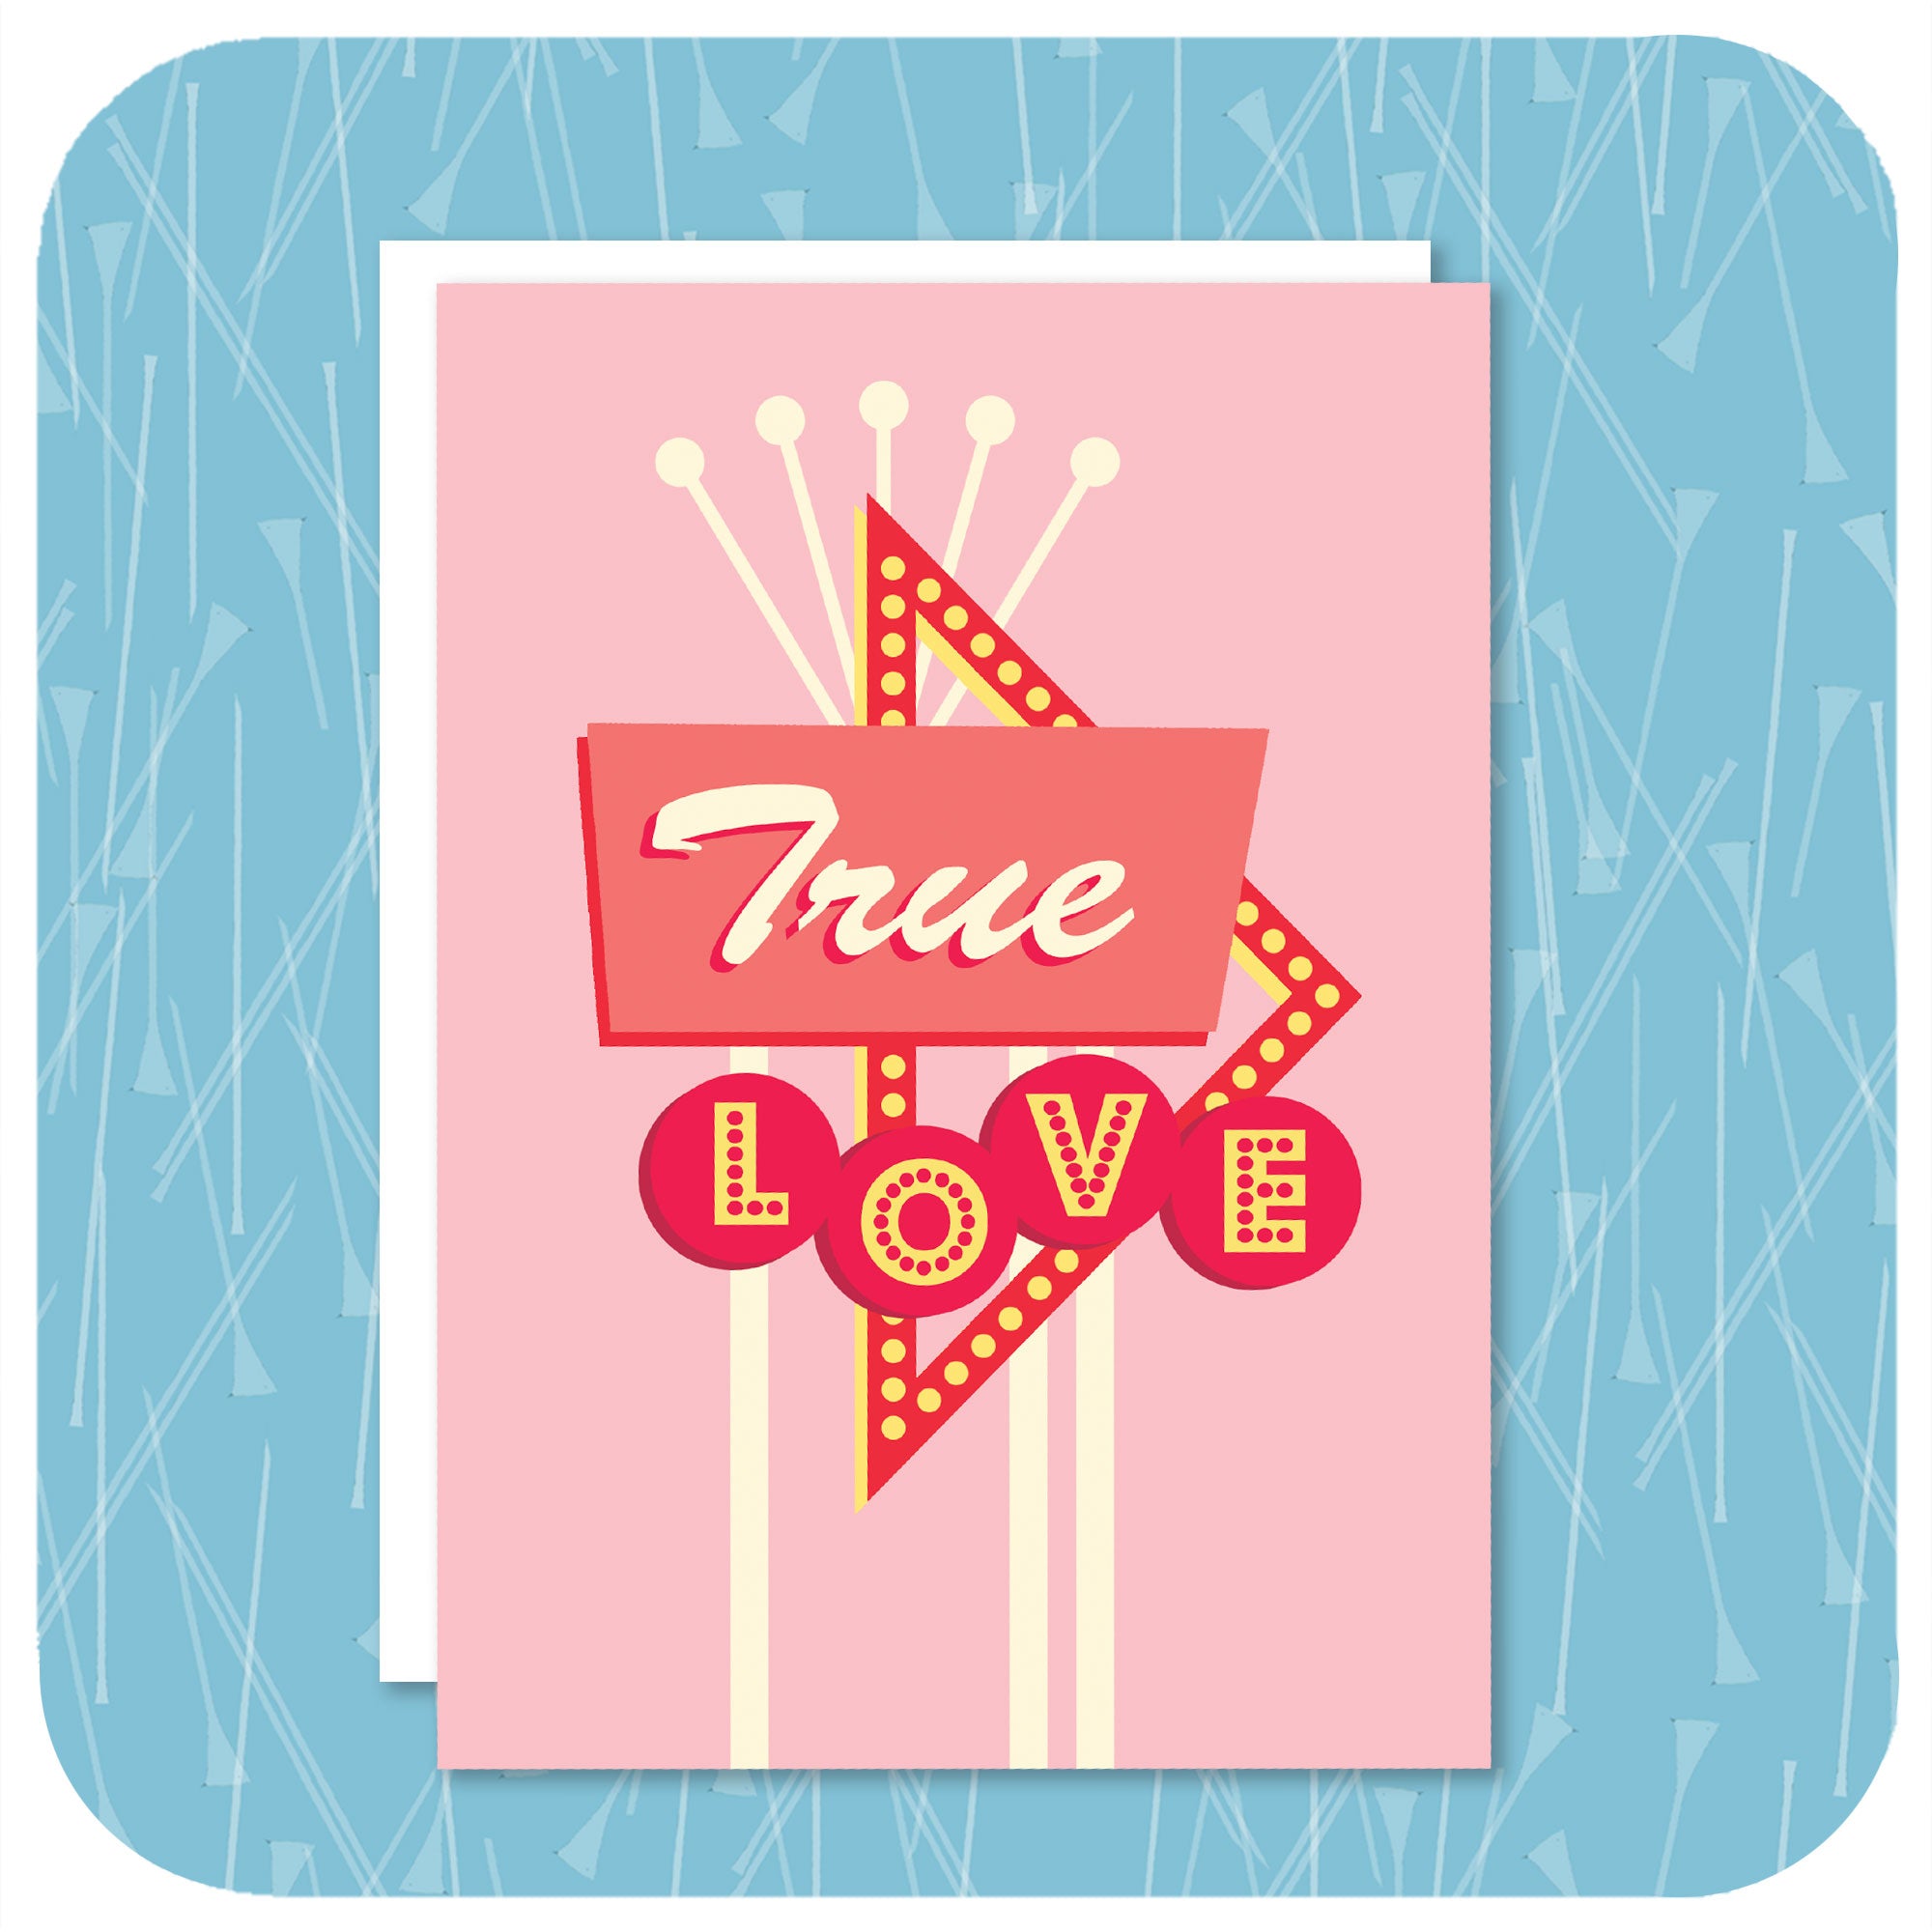 A pink A6 greetings card featuring a graphic rendering of a 50s style American roadside neon sign with the words "True Love" with a white envelope sits on a  textured light blue background | The Inkabilly Emporium